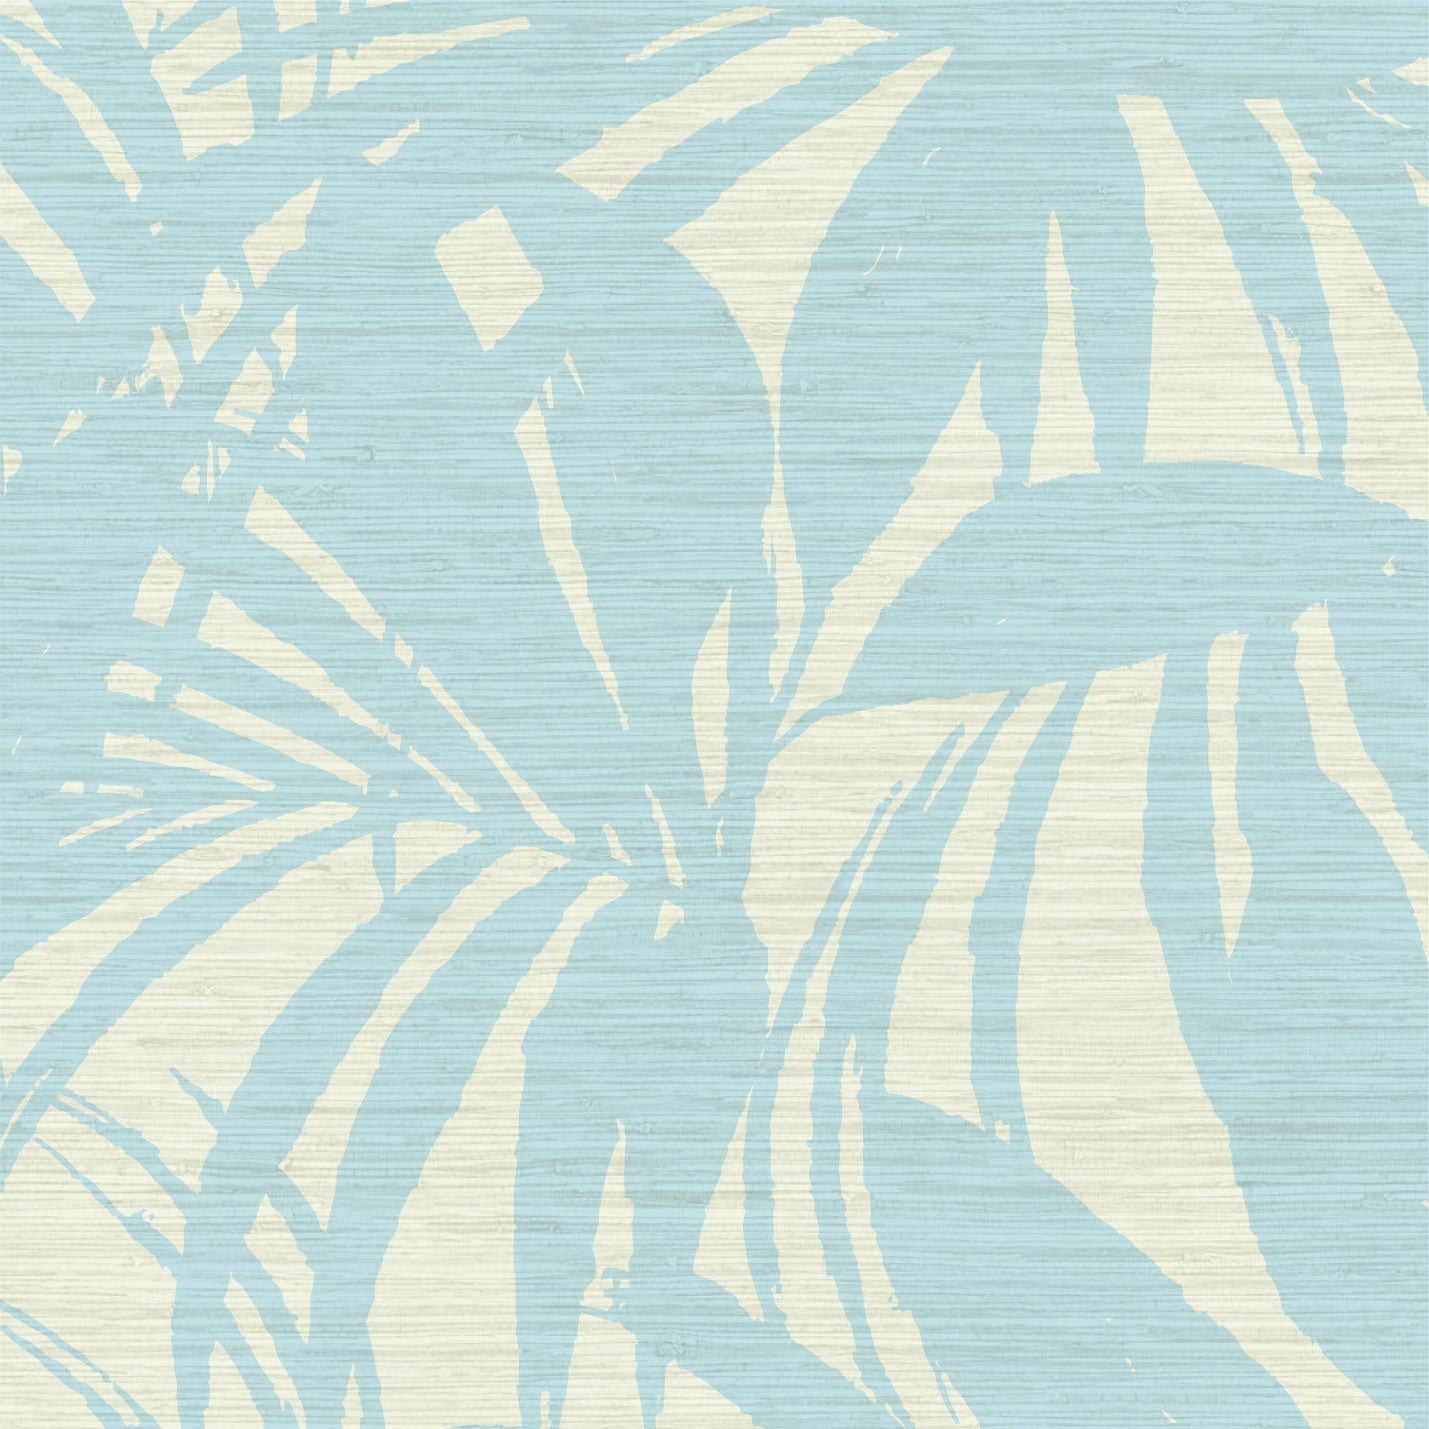 printed grasscloth wallpaper oversize tropical leaf Natural Textured Eco-Friendly Non-toxic High-quality  Sustainable practices Sustainability Interior Design Wall covering Bold retro chic custom jungle garden botanical Seaside Coastal Seashore Waterfront Vacation home styling Retreat Relaxed beach vibes Beach cottage Shoreline Oceanfront white blue ocean sky 